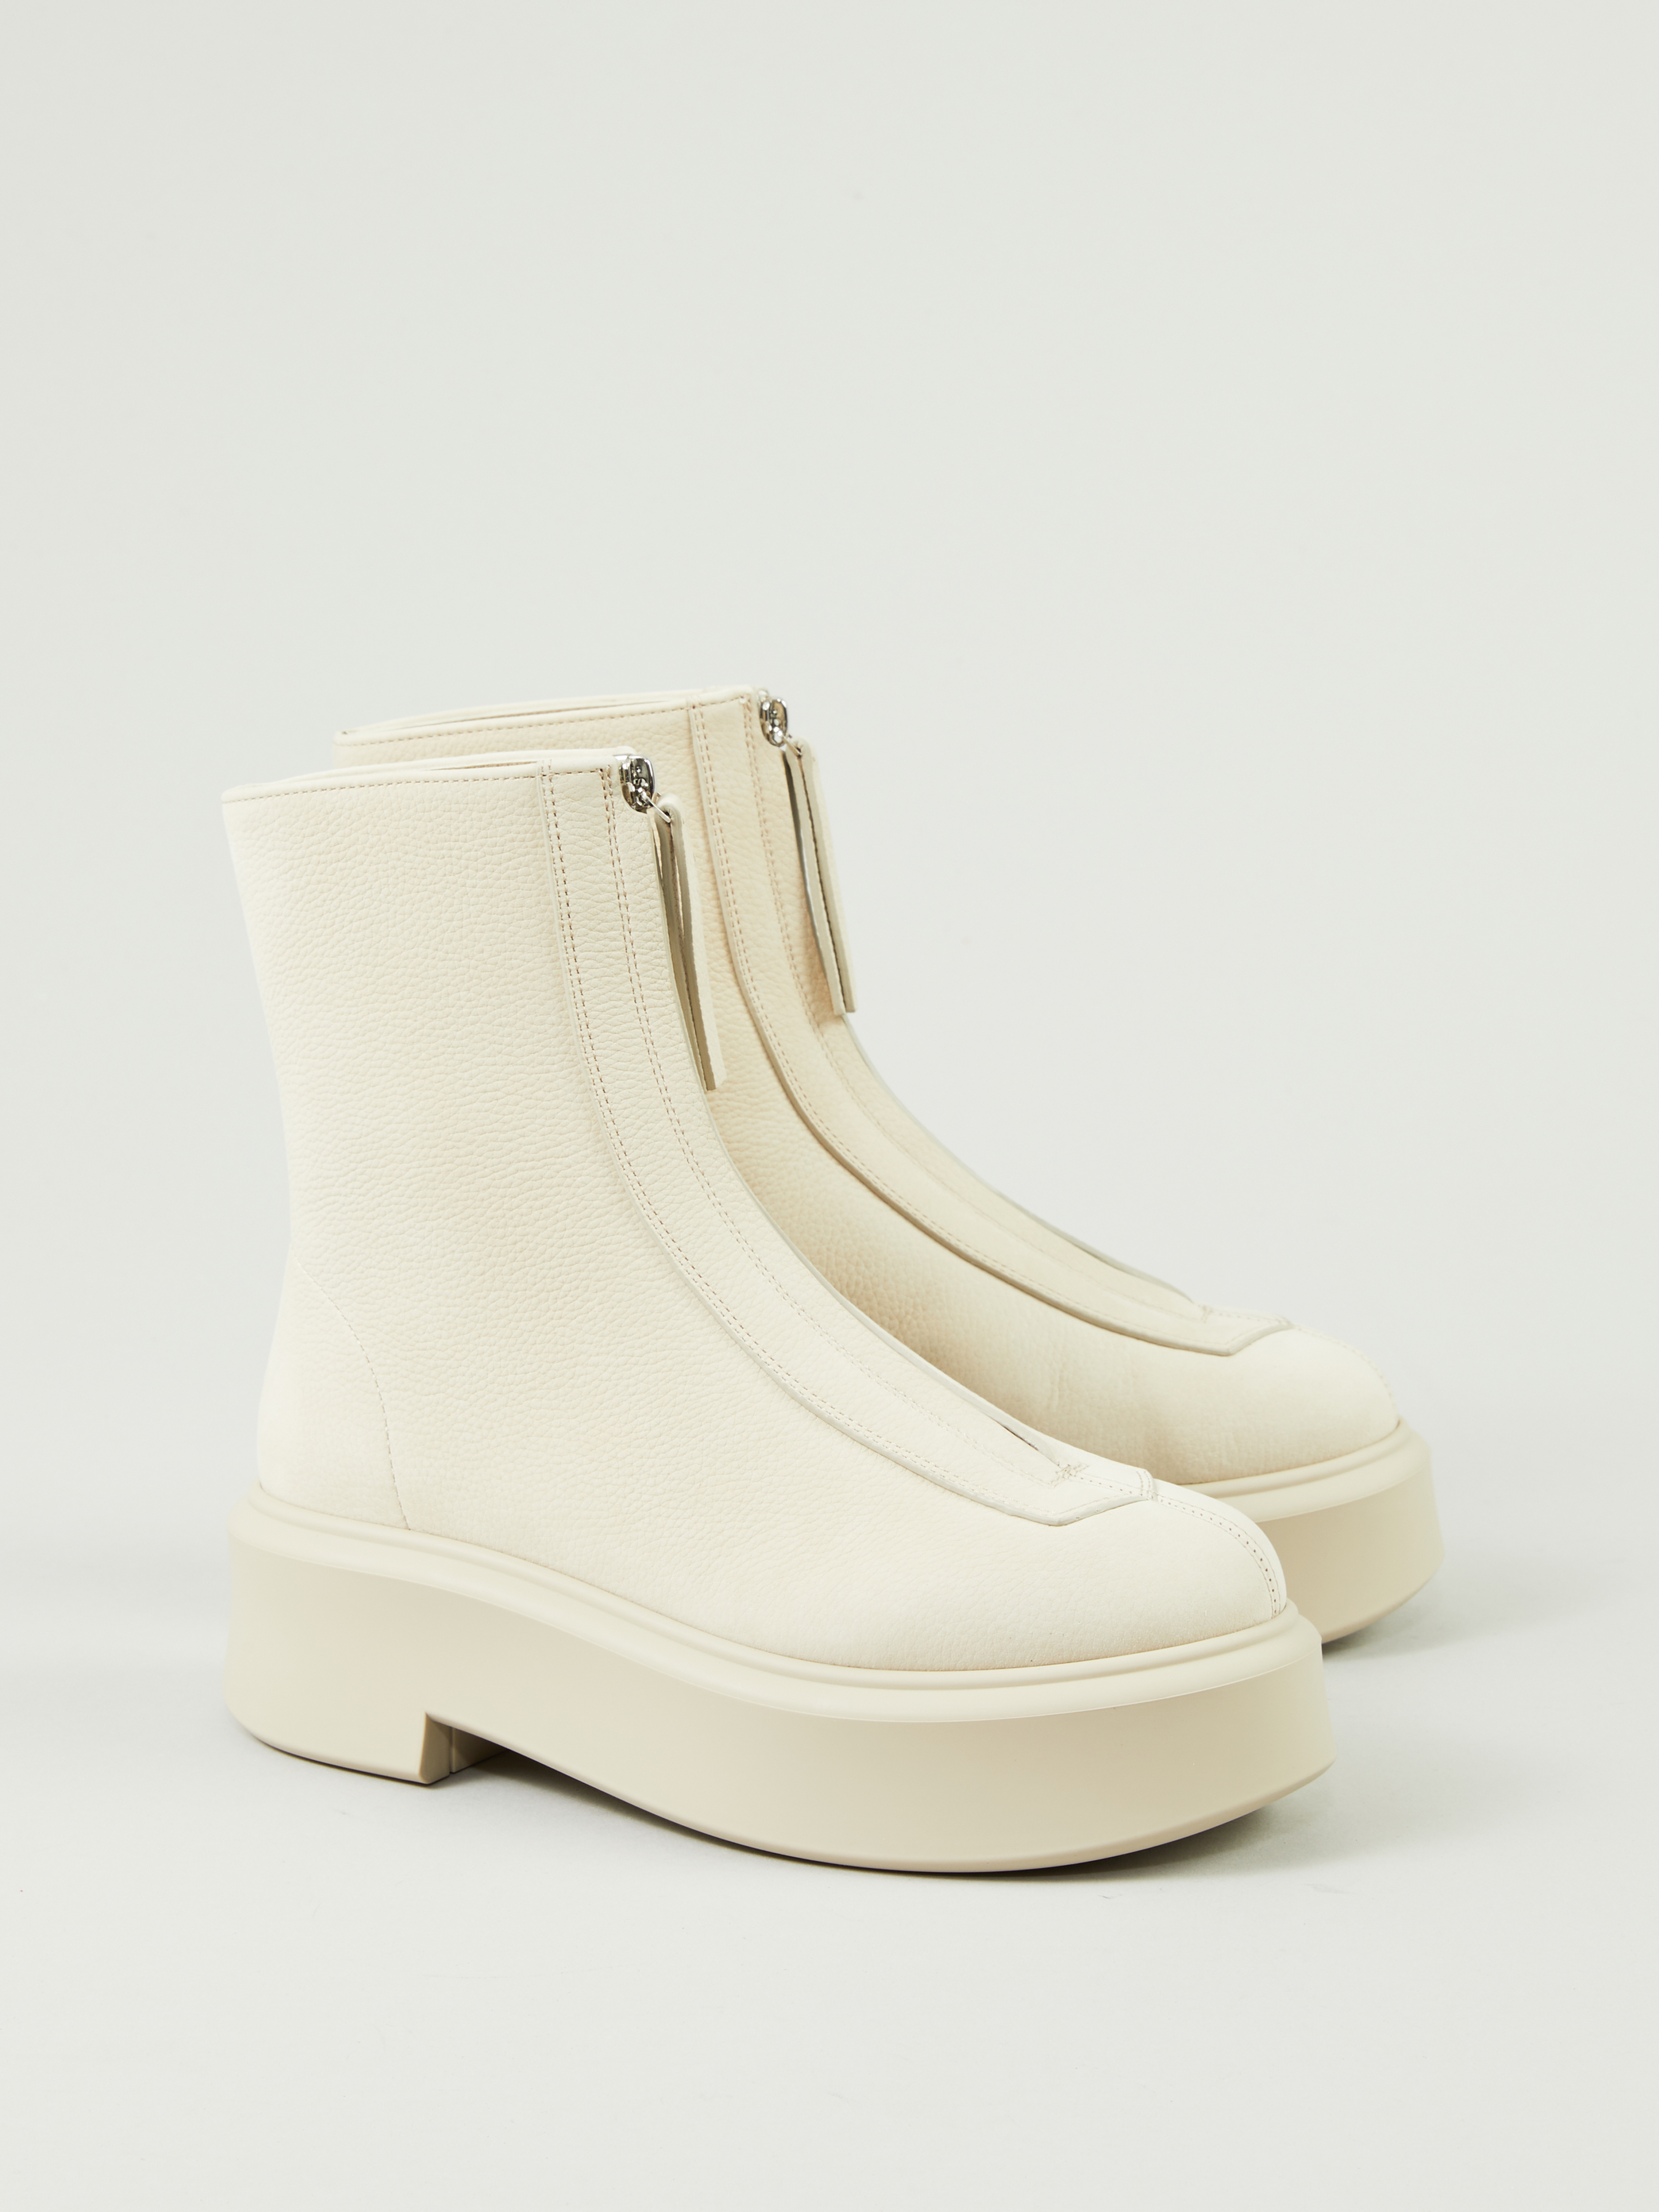 the row zipped boot